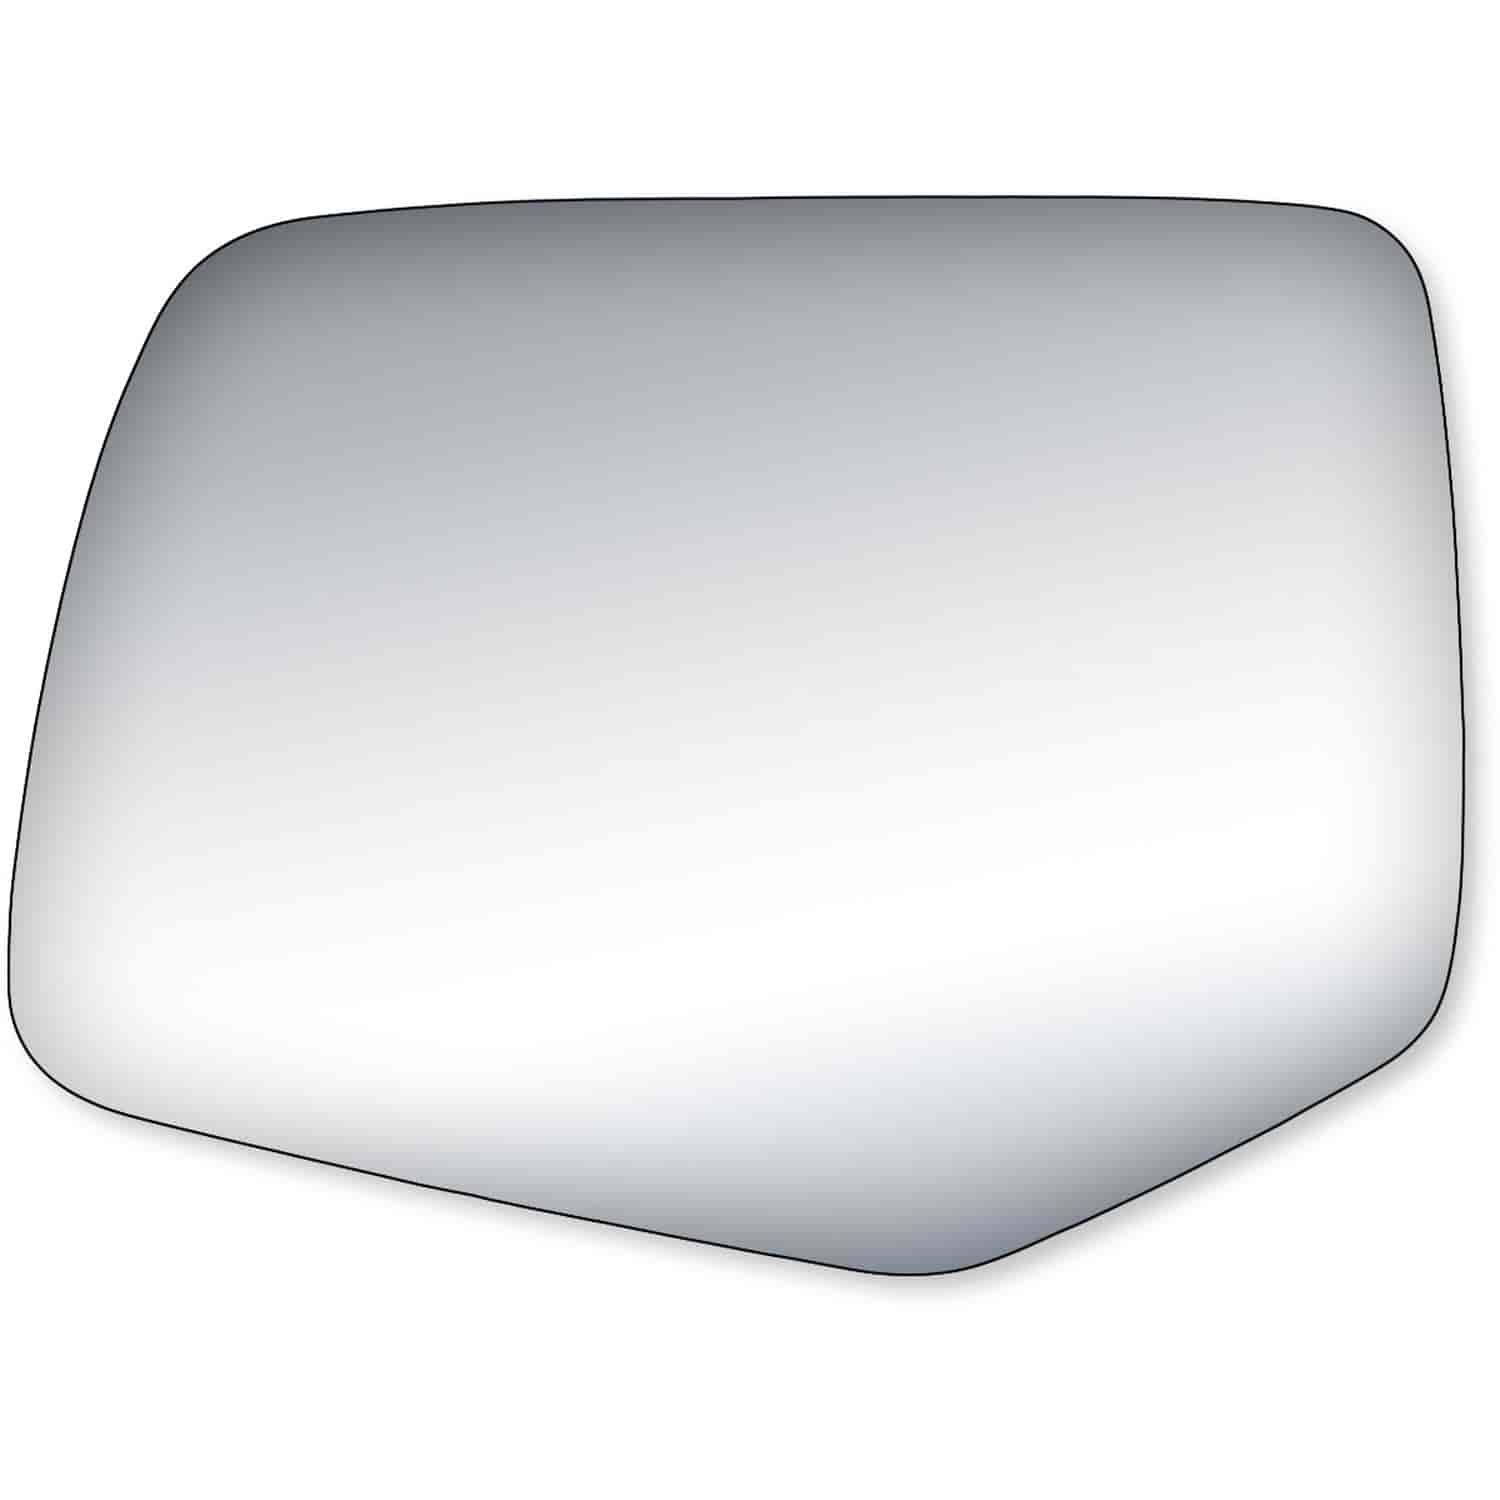 Replacement Glass for 08-12 Escape/ Hybrid w/out blind